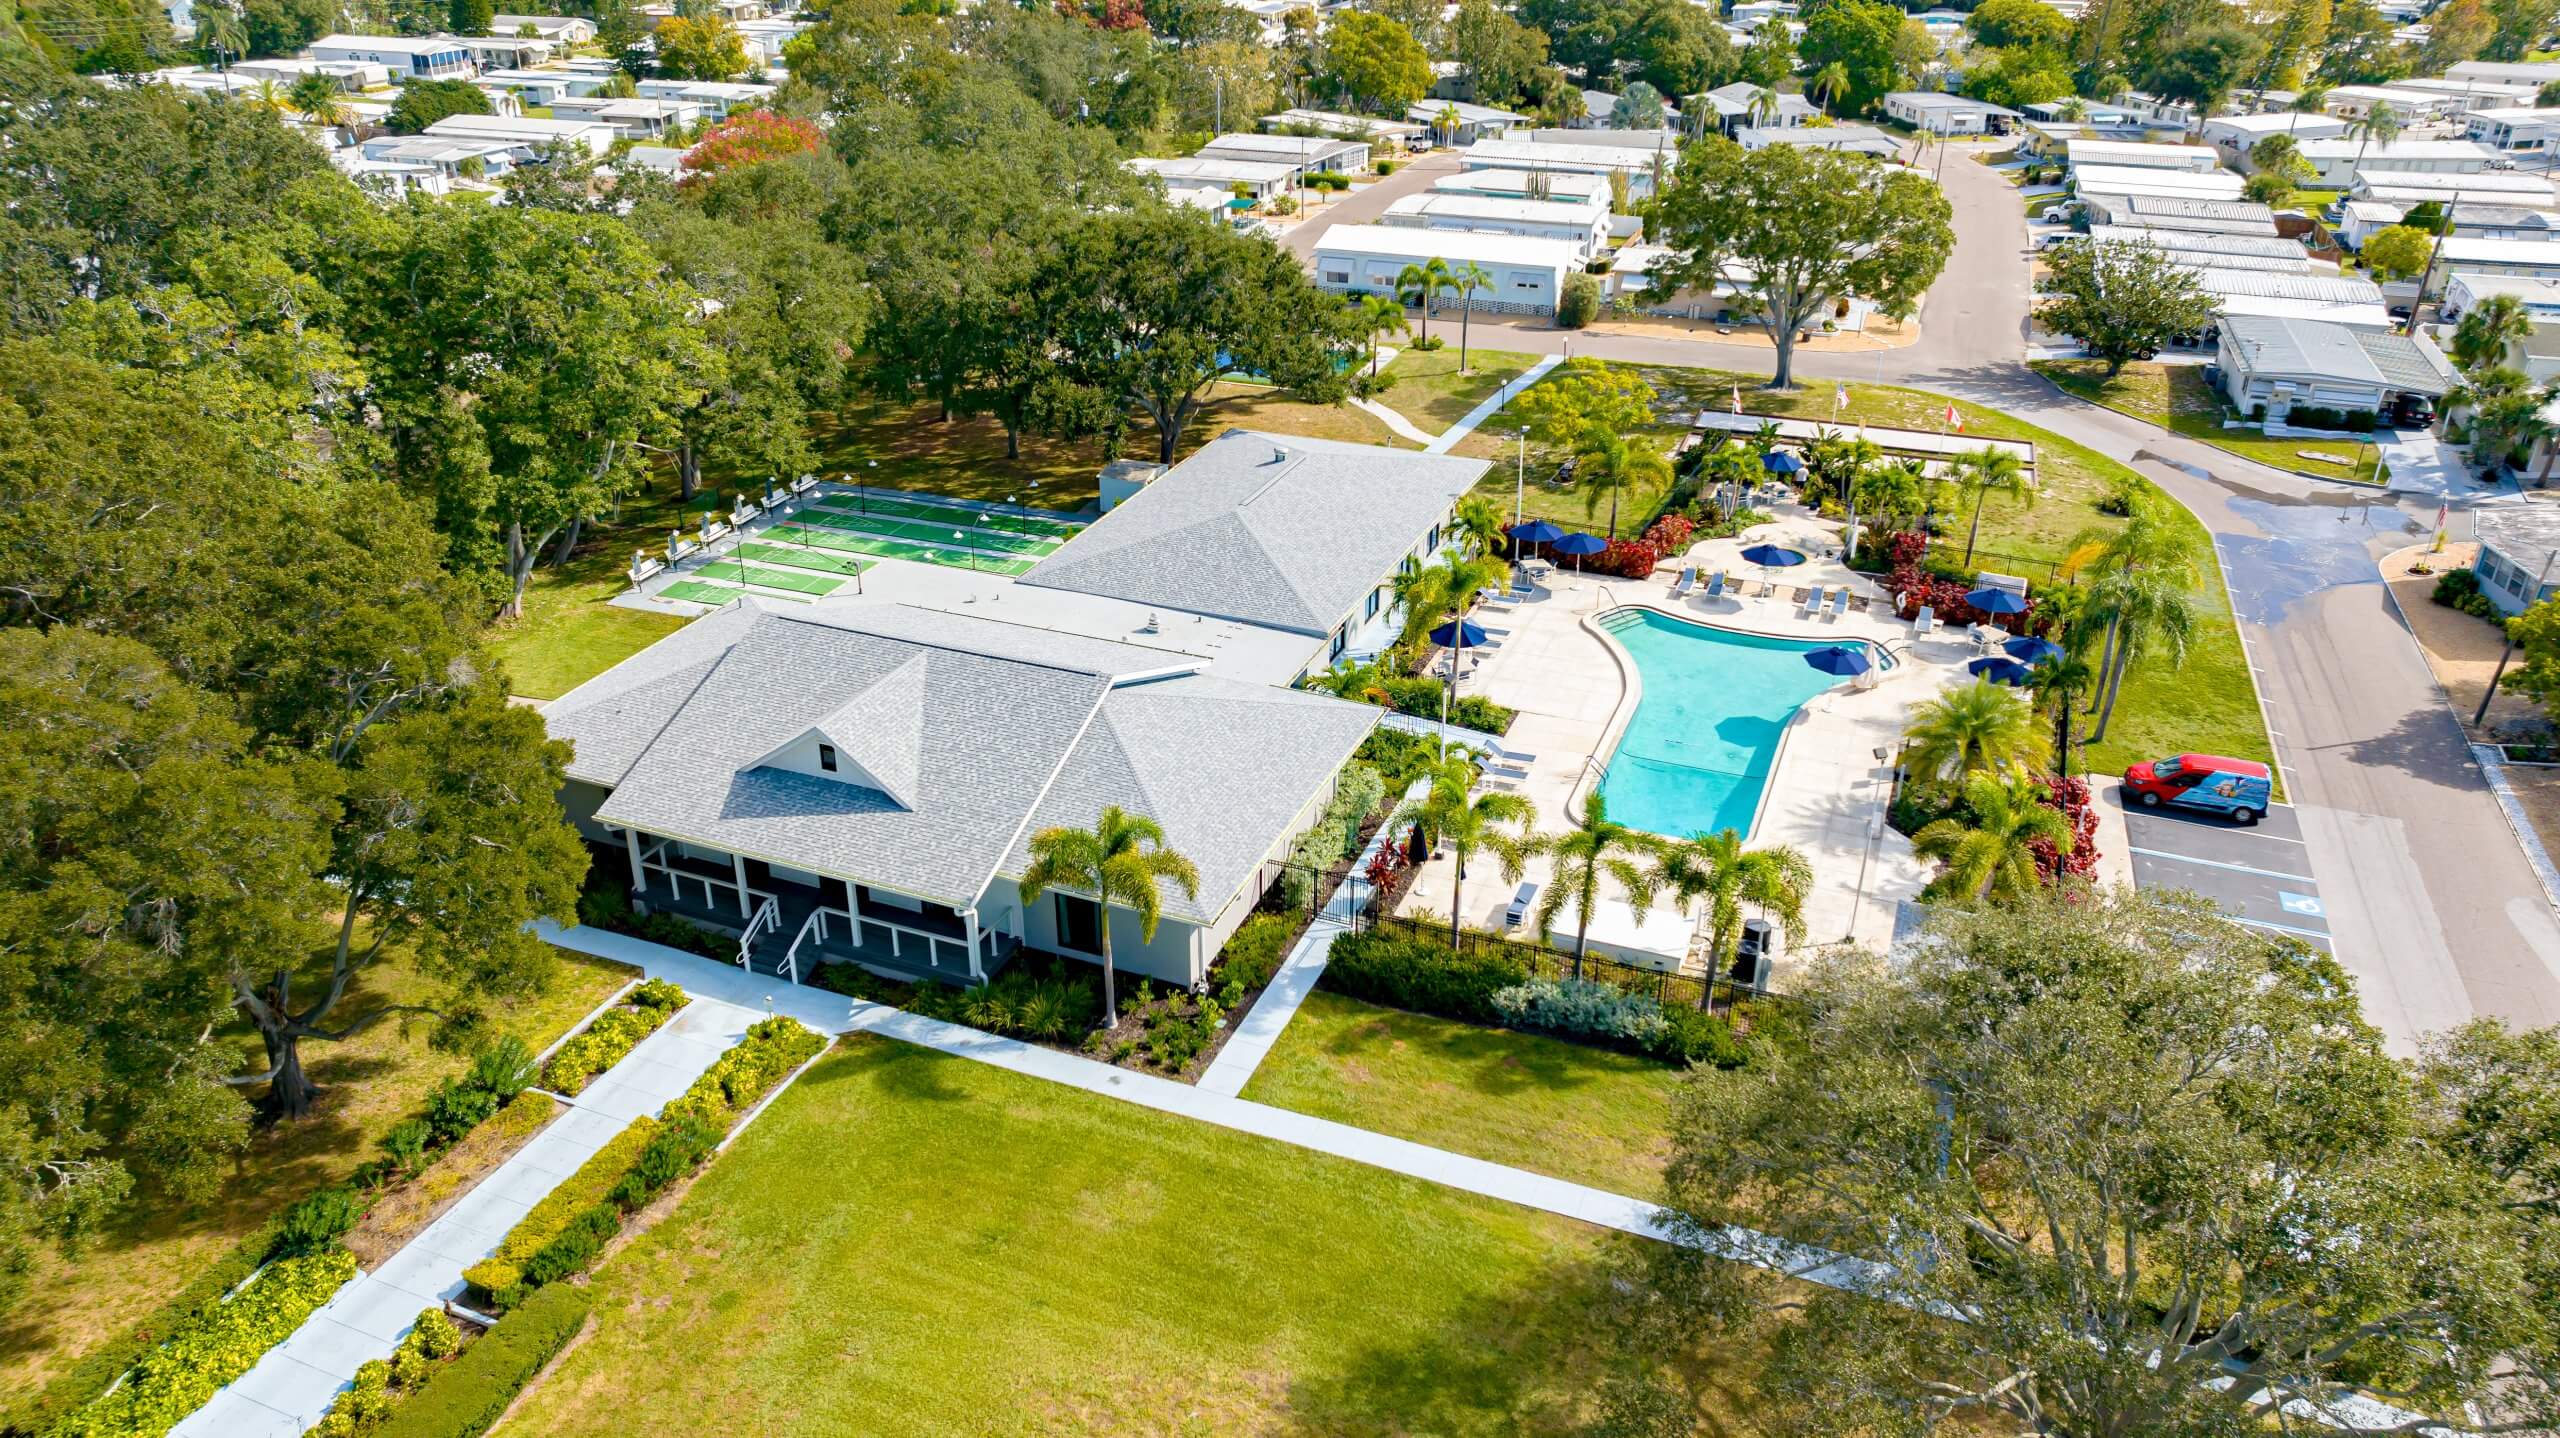 Aerial view of a community center with pool, shuffleboard courts, amidst residential mobile homes.